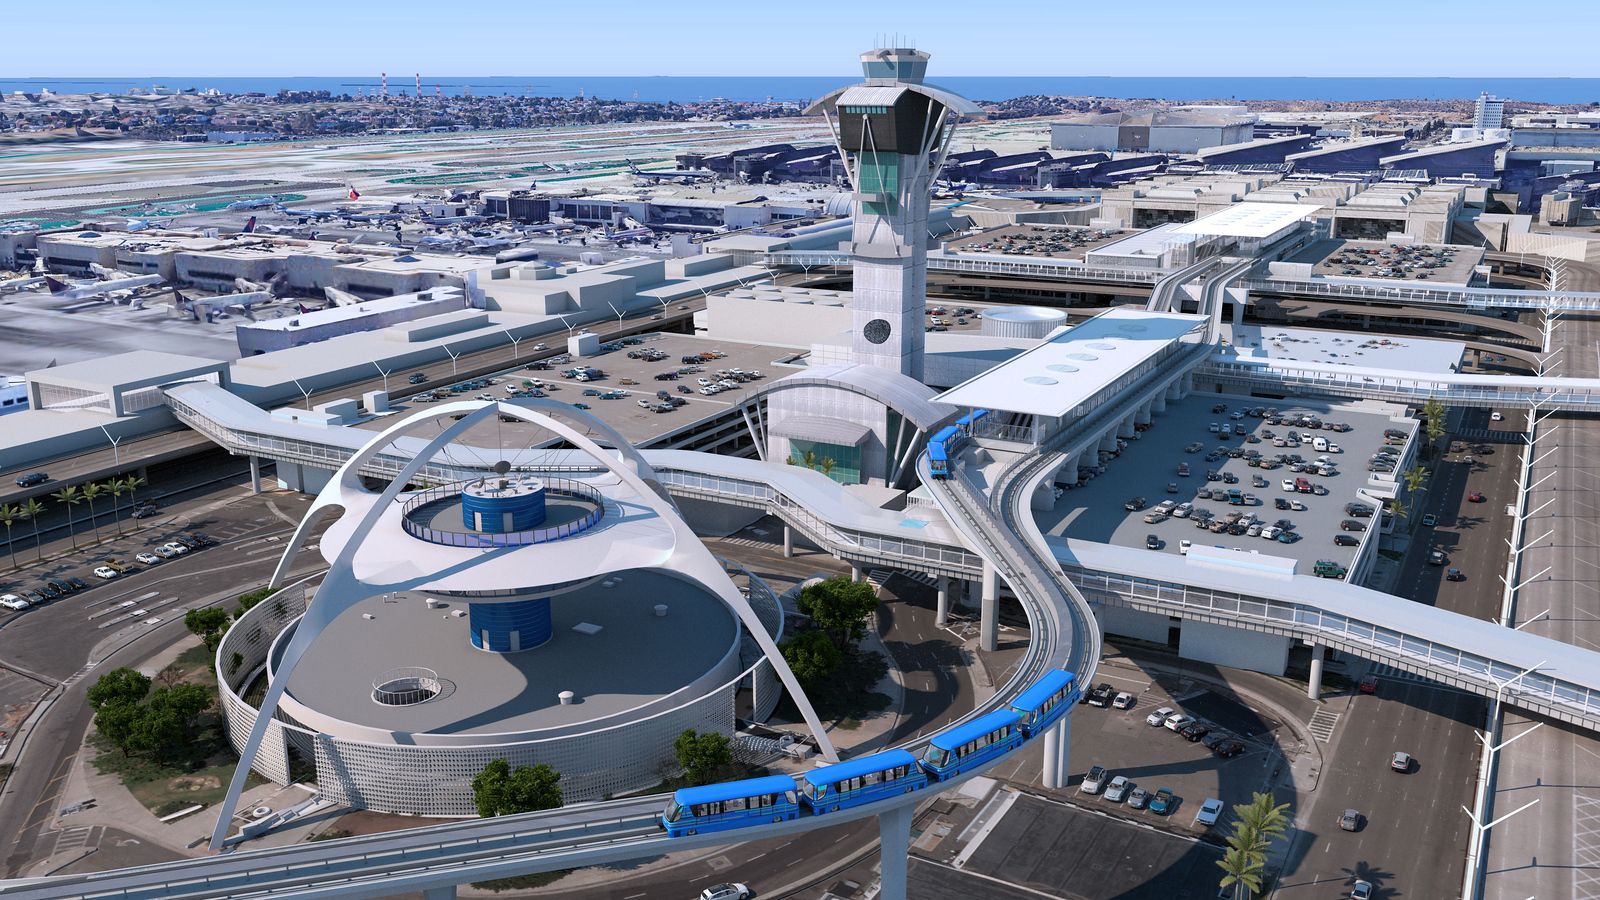 Render of the new automated people mover at LAX.